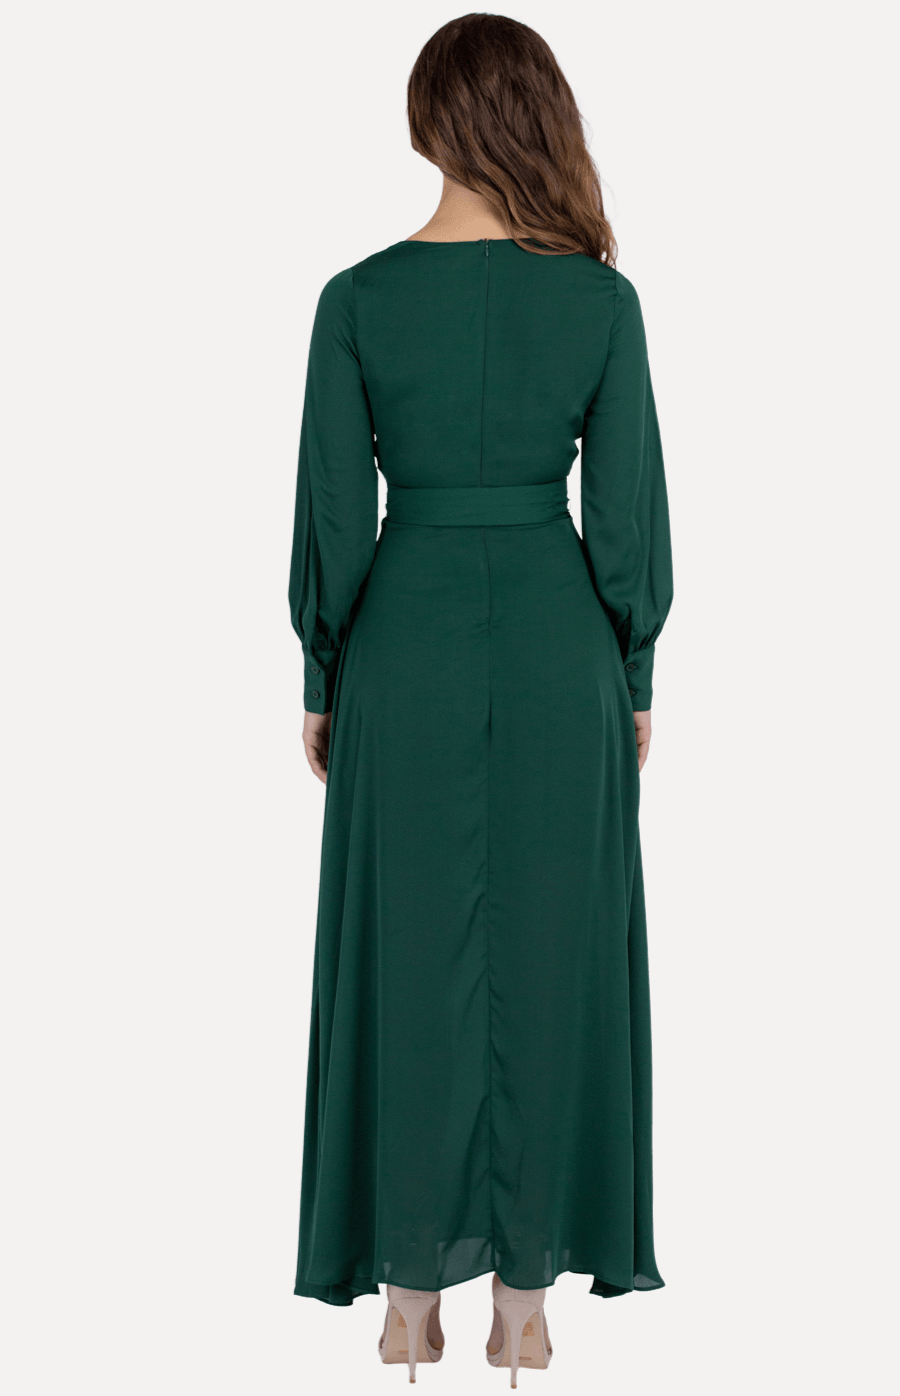 Ember Maxi Dress in Emerald - Ophelia Fox Boutique